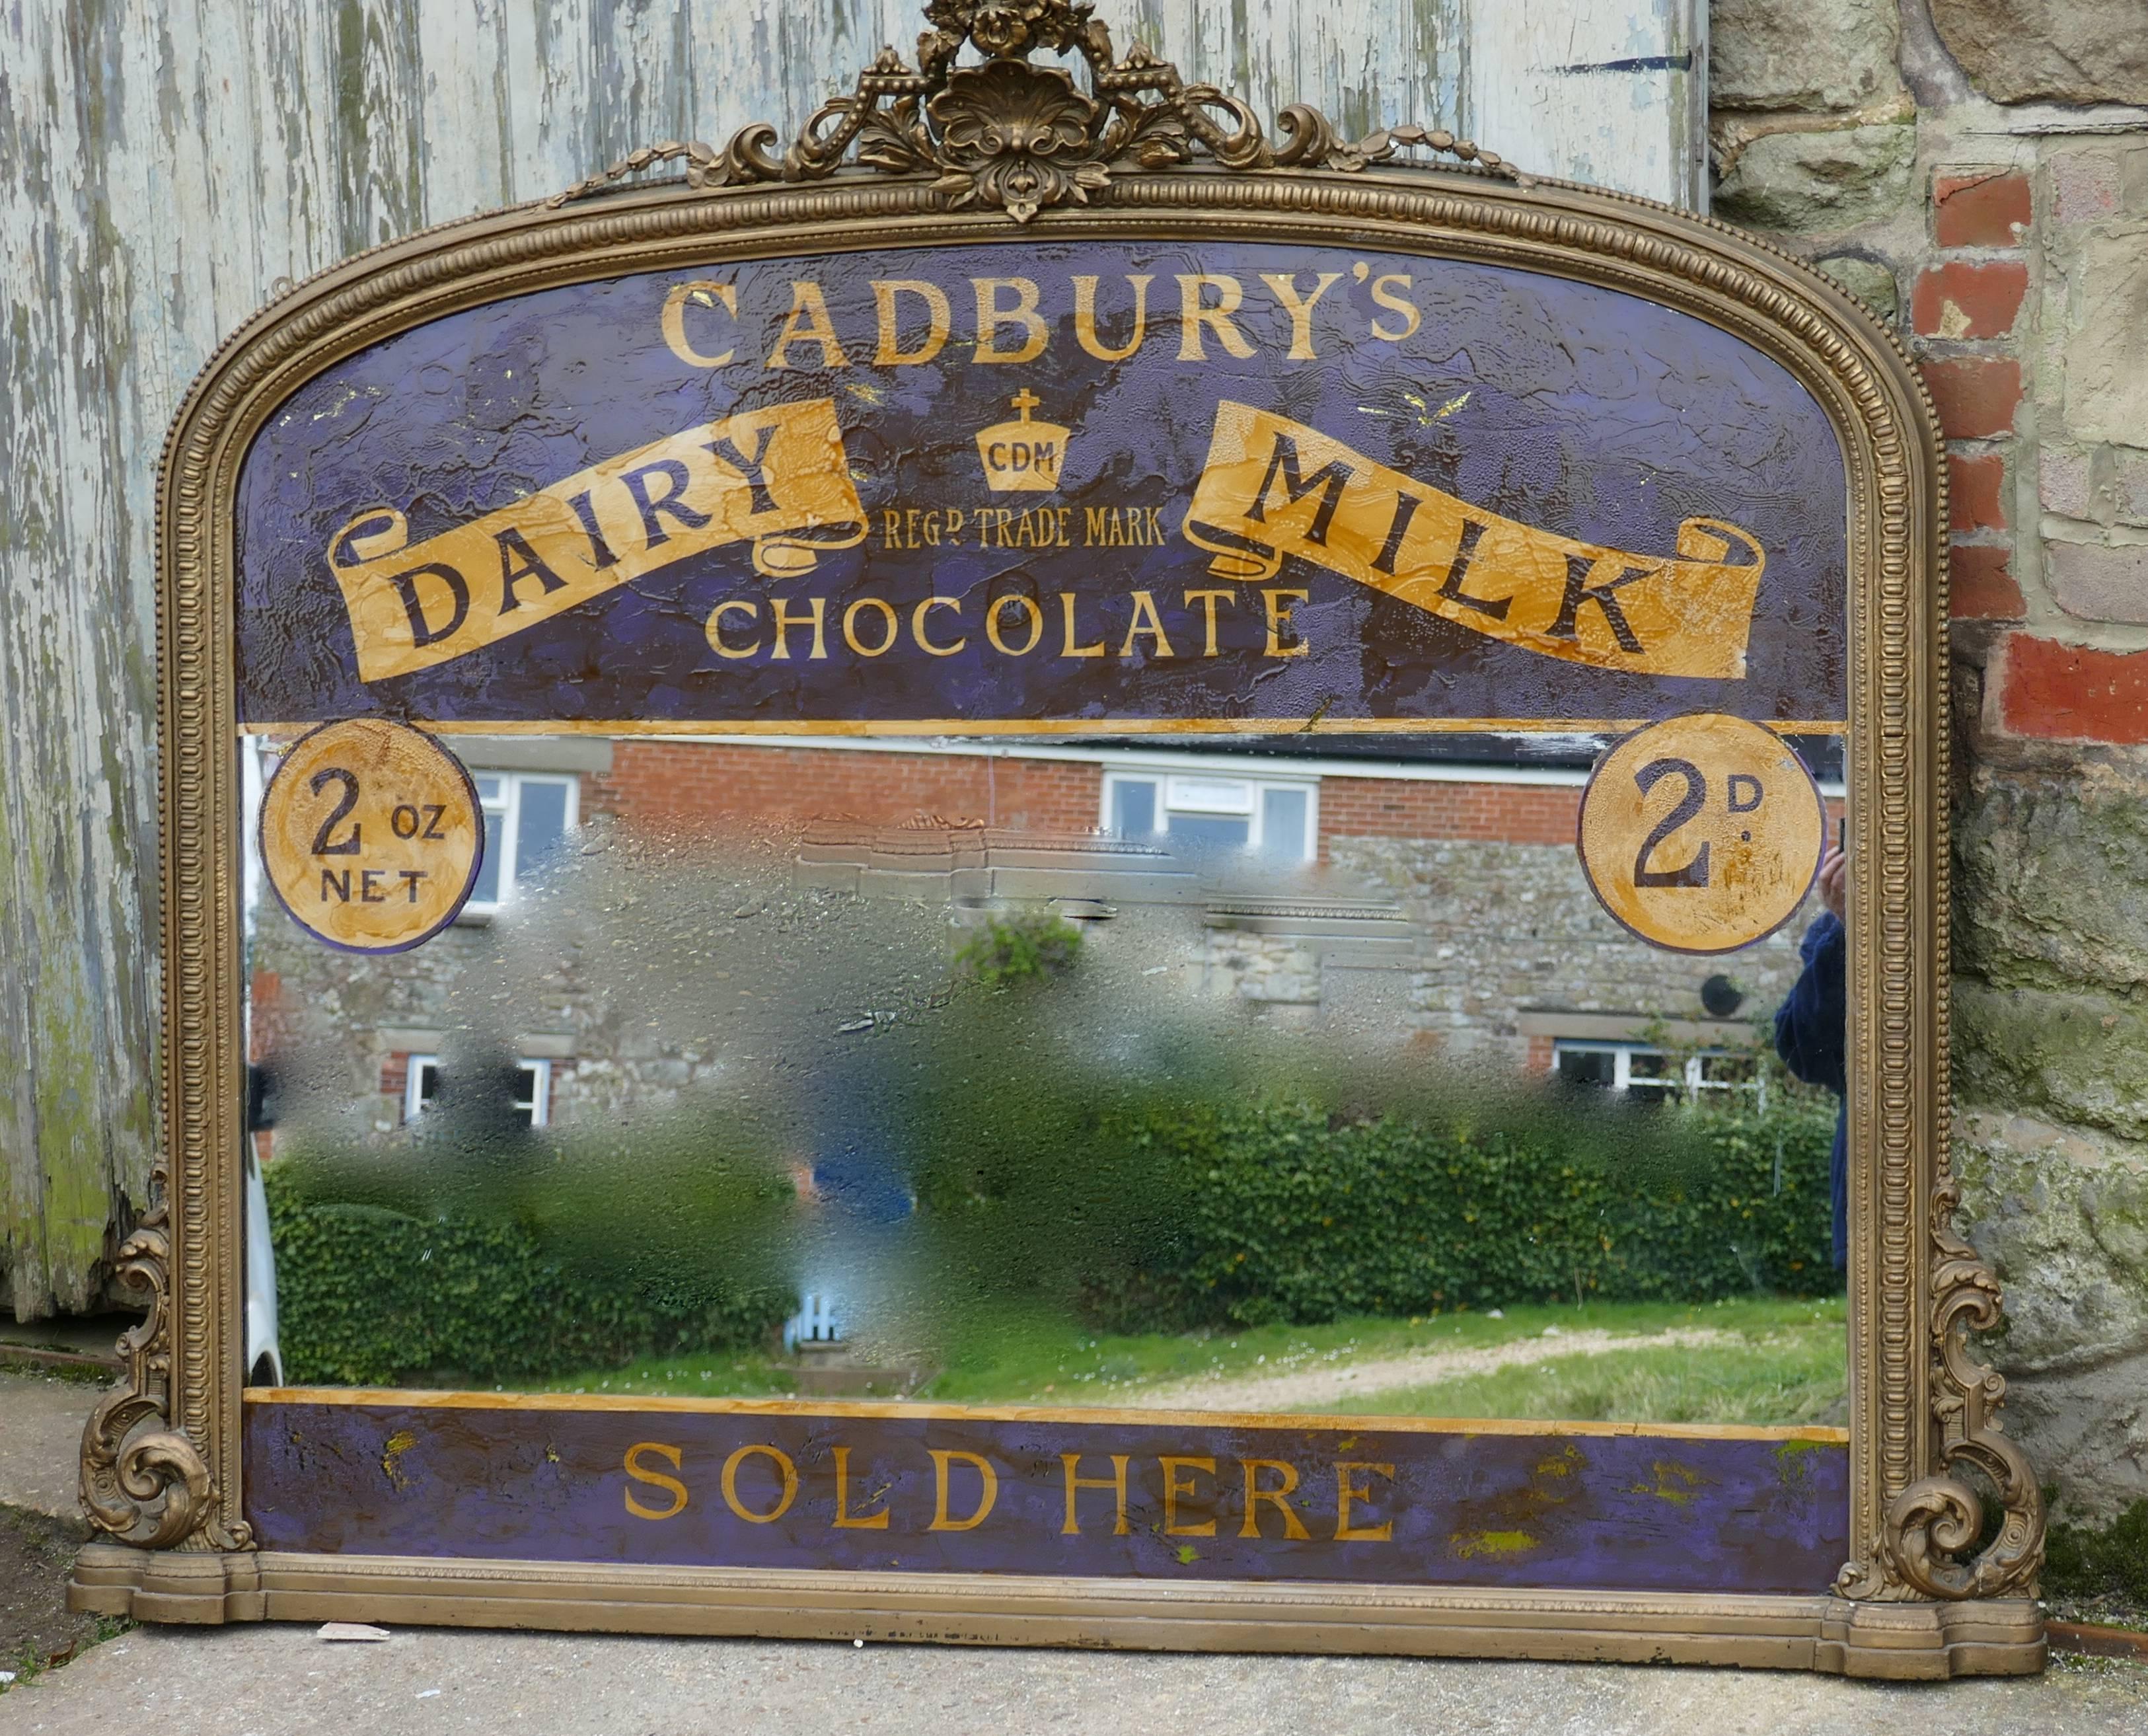 Large Victorian advertising mirror, Cadbury’s chocolate over mantel.

This is a superb quality and very large Victorian wall mirror or over mantel, it has the Classic purple and gold, Cadbury’s milk chocolate advertising banner at the top and